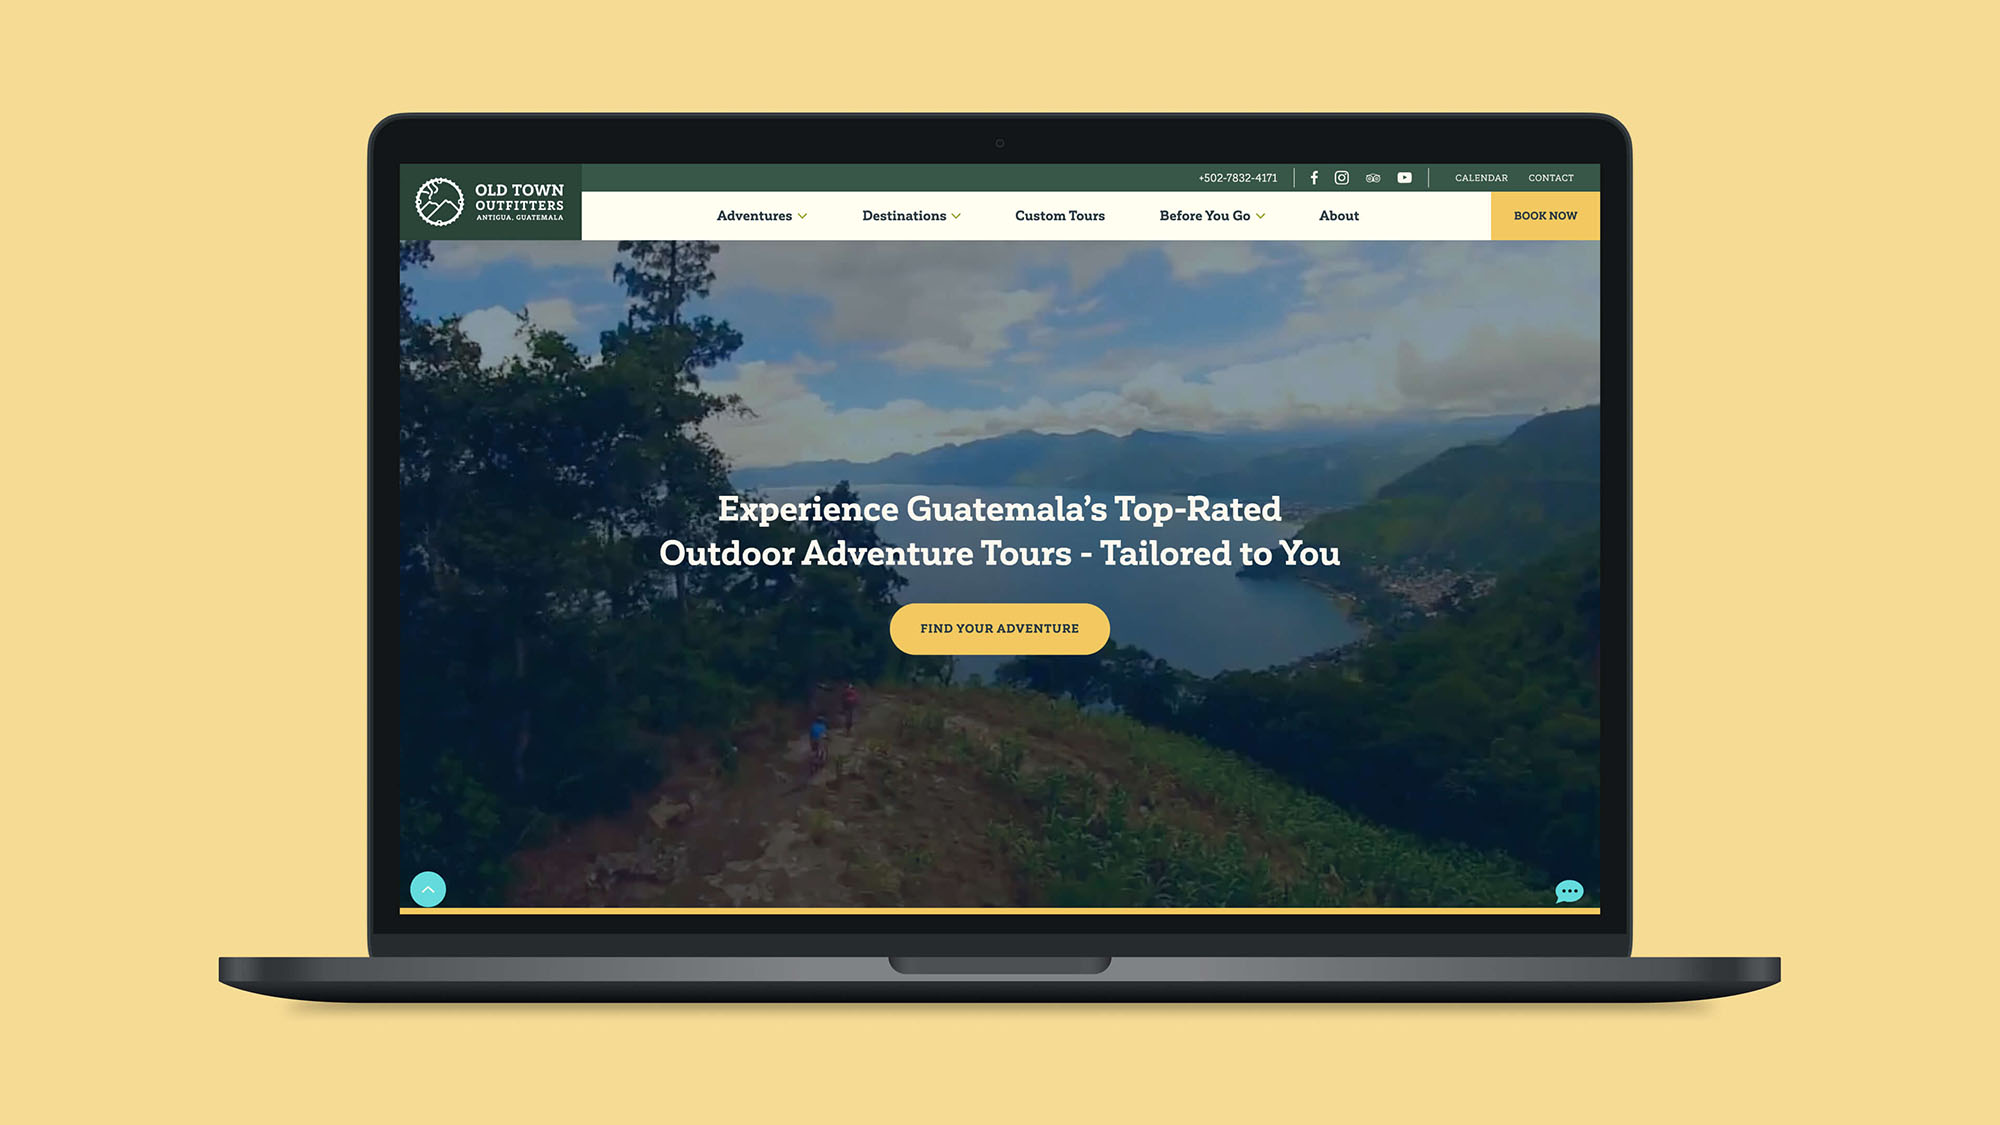 Old Town Outfitters Website Home Page